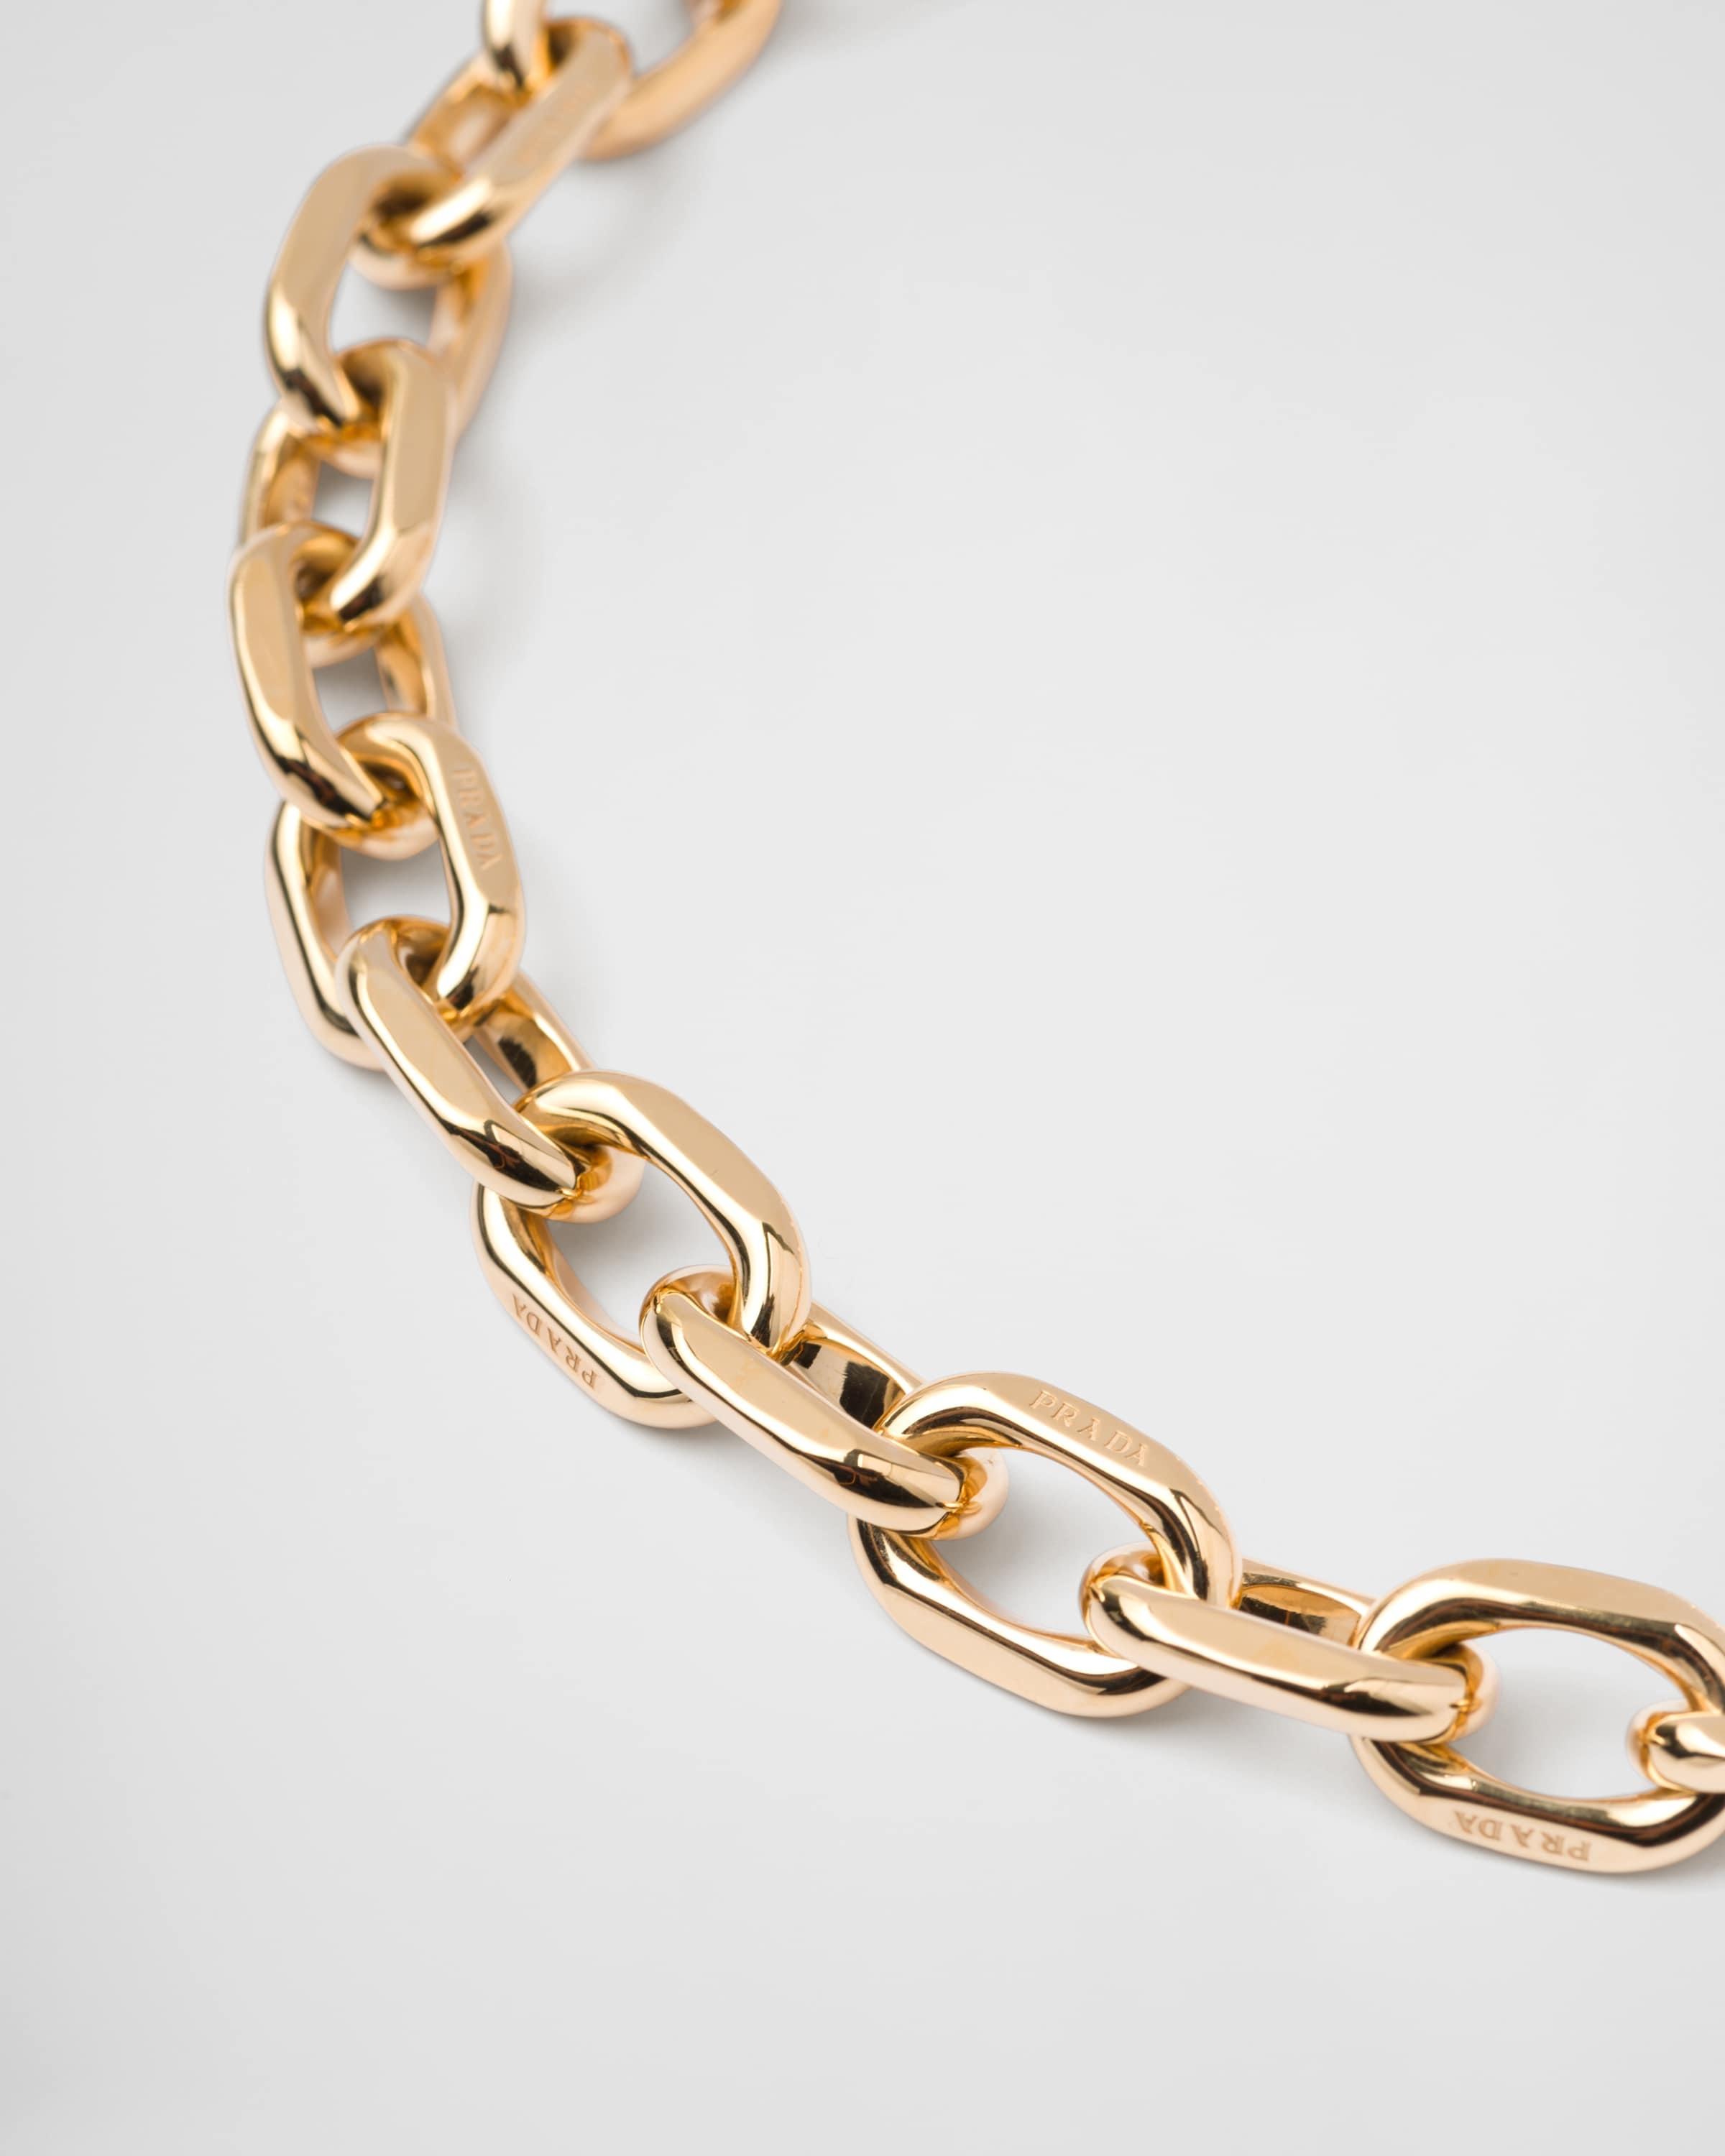 Eternal Gold chain necklace in yellow gold - 2